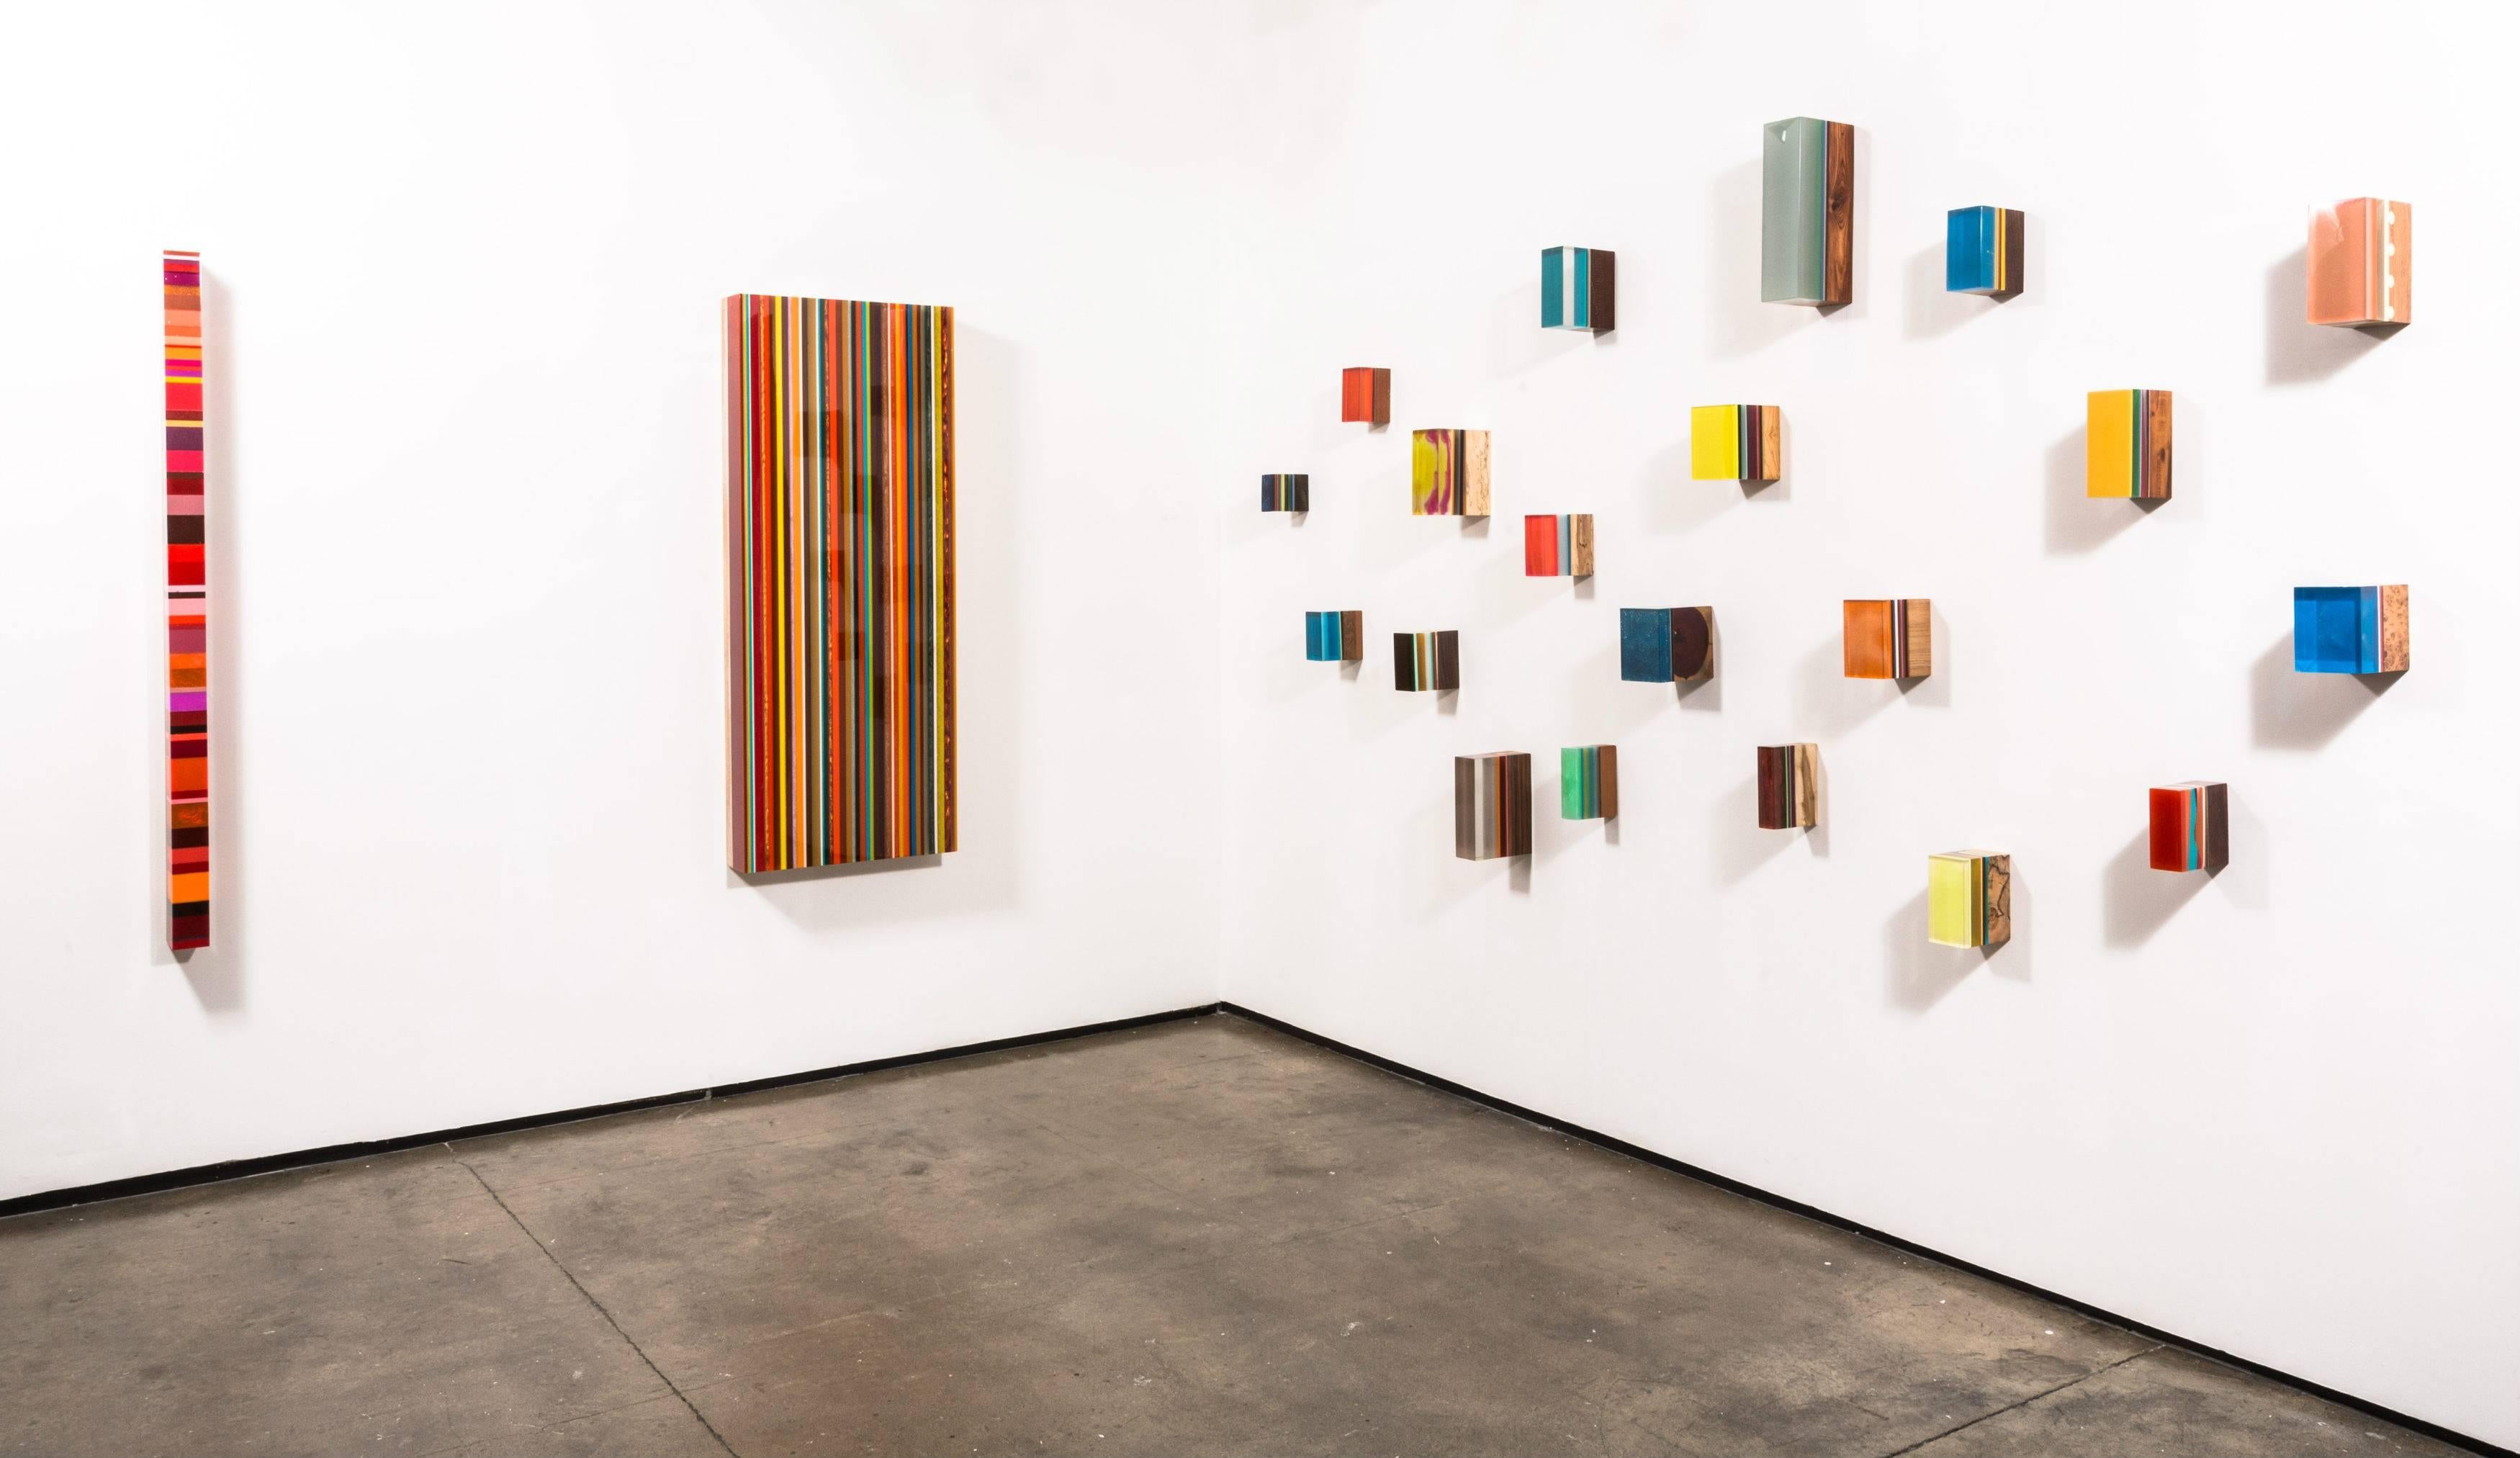 Multi-colored stripes with orange, yellow, crimson, red, green and blue
In a technique evolved over years of experimentation, Schmitz-Schmelzer pours resin in parallel or vertical layers onto a plywood-capped base of raw tropical wood. Marriage of